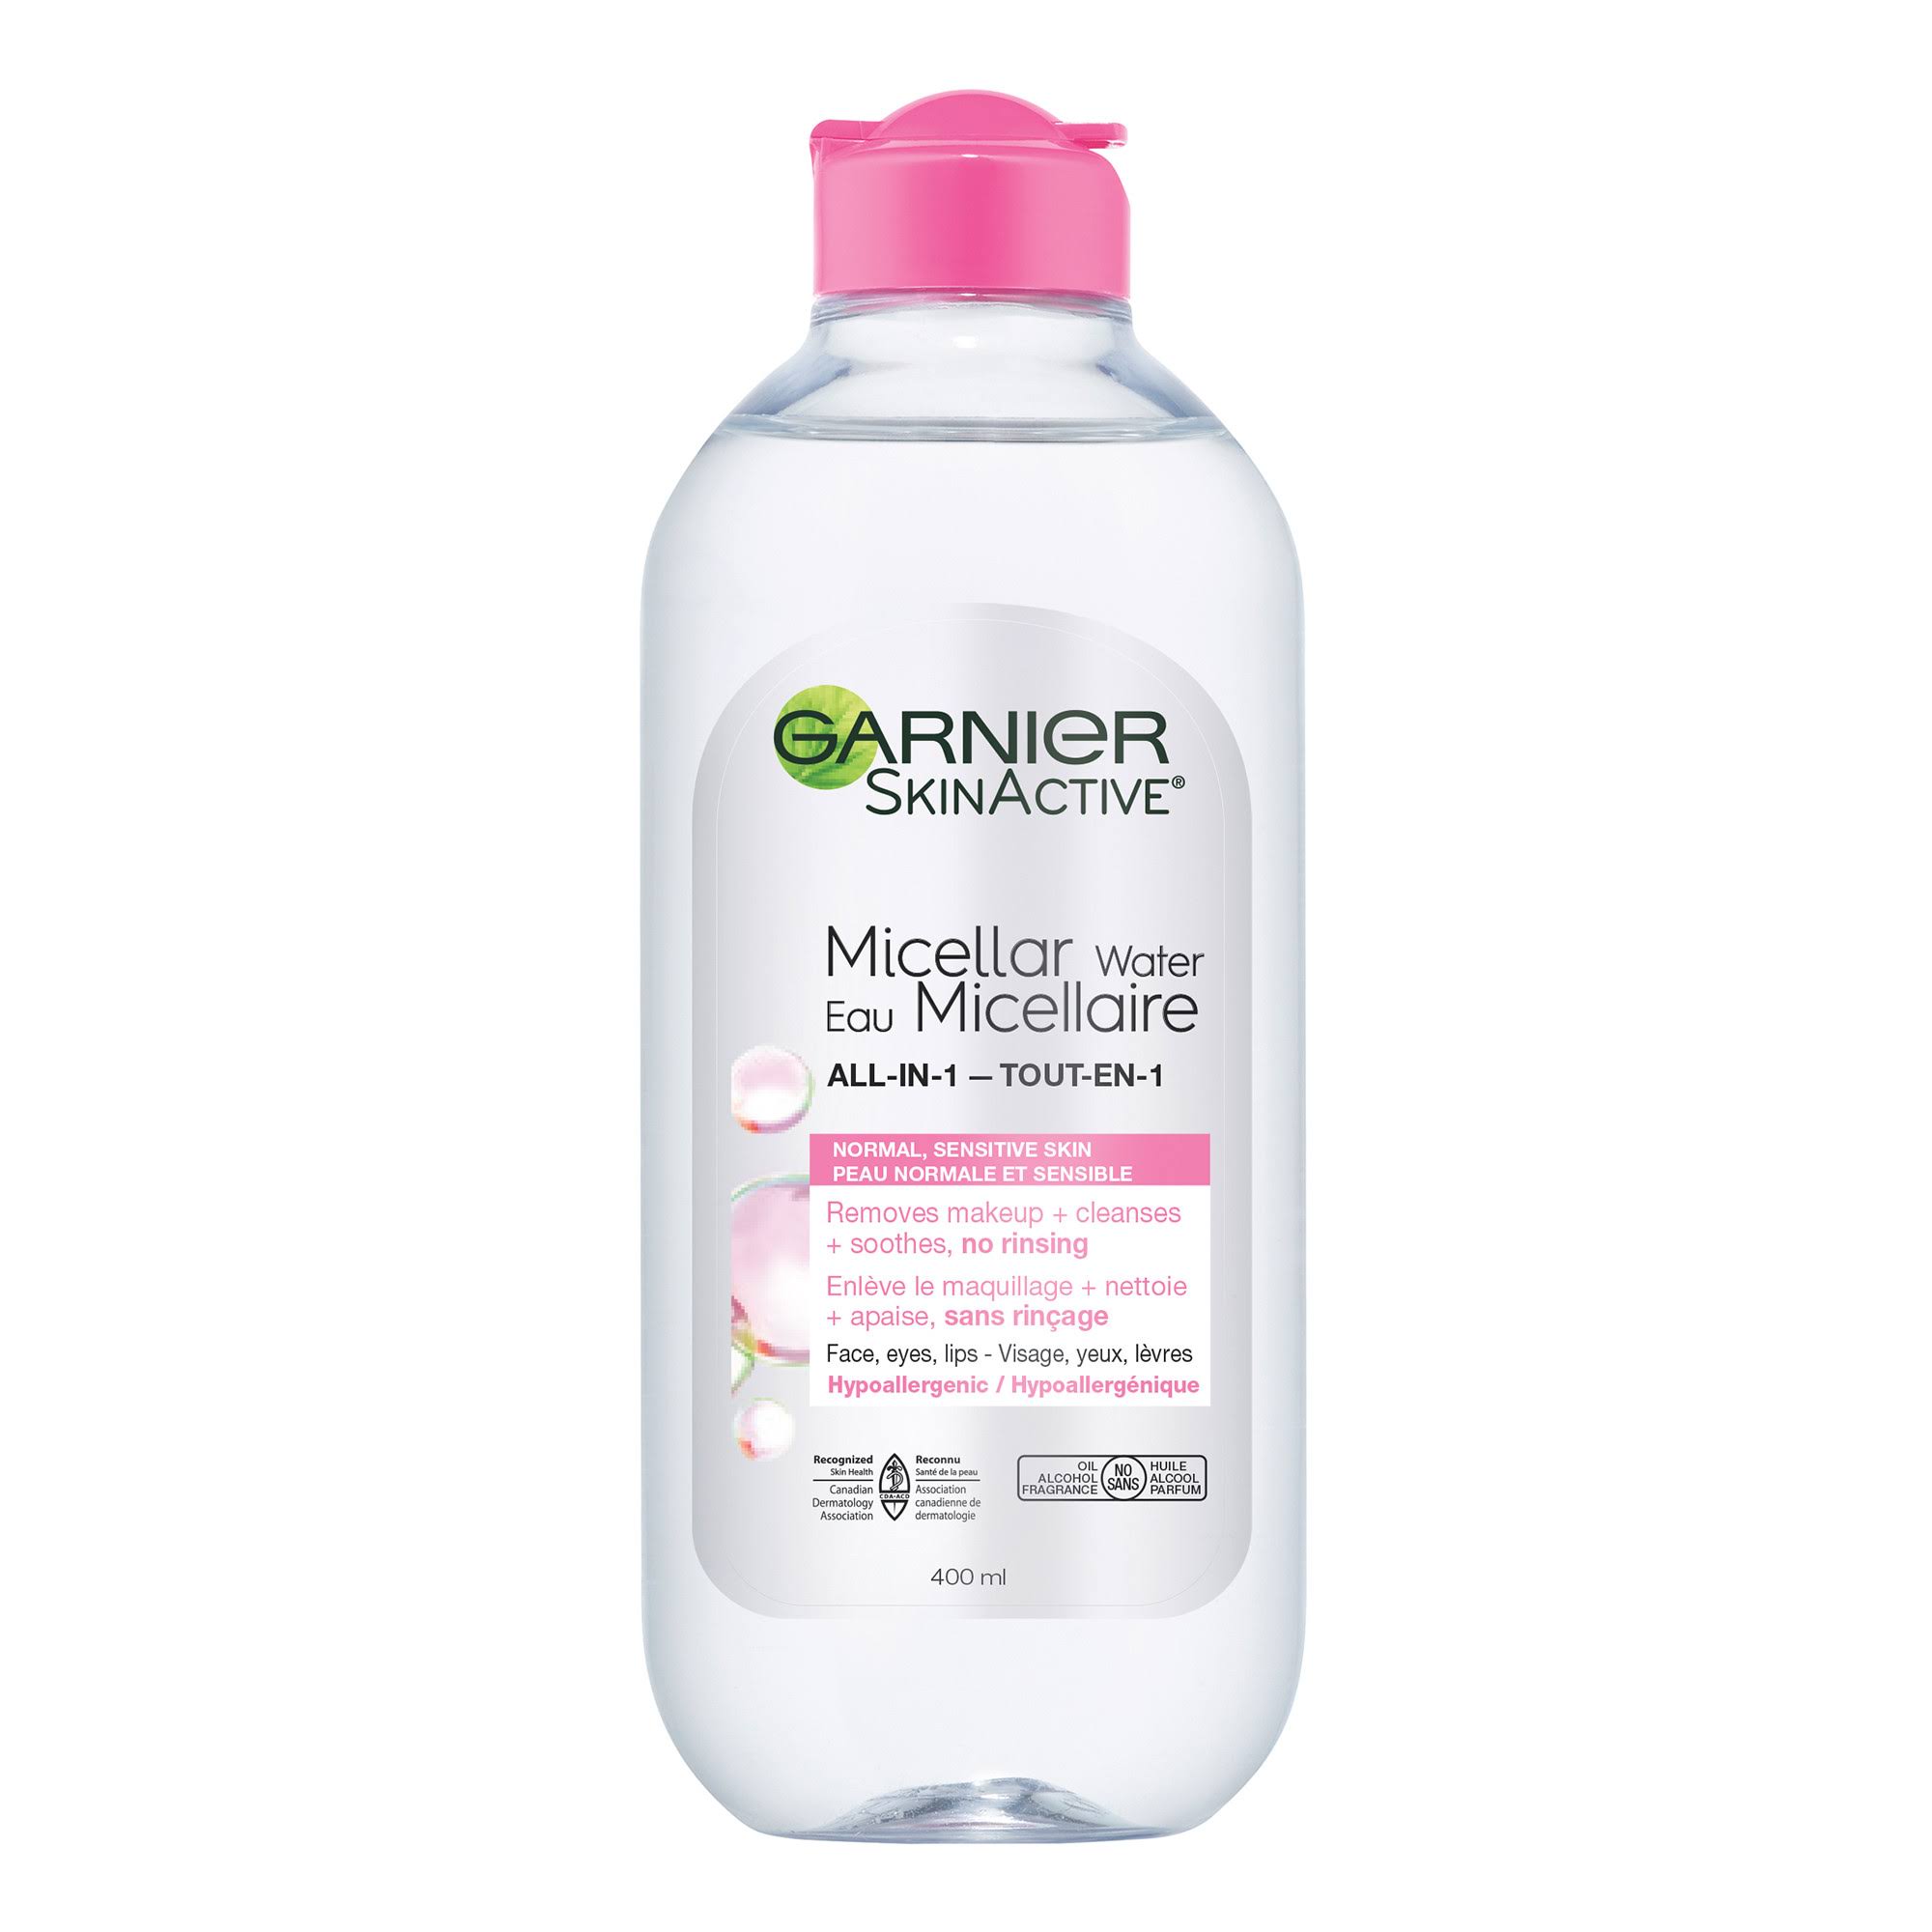 Garnier Skin Active Micellar Cleansing Water All In 1 Cleanser And Makeup Remover - 13.5 fl oz